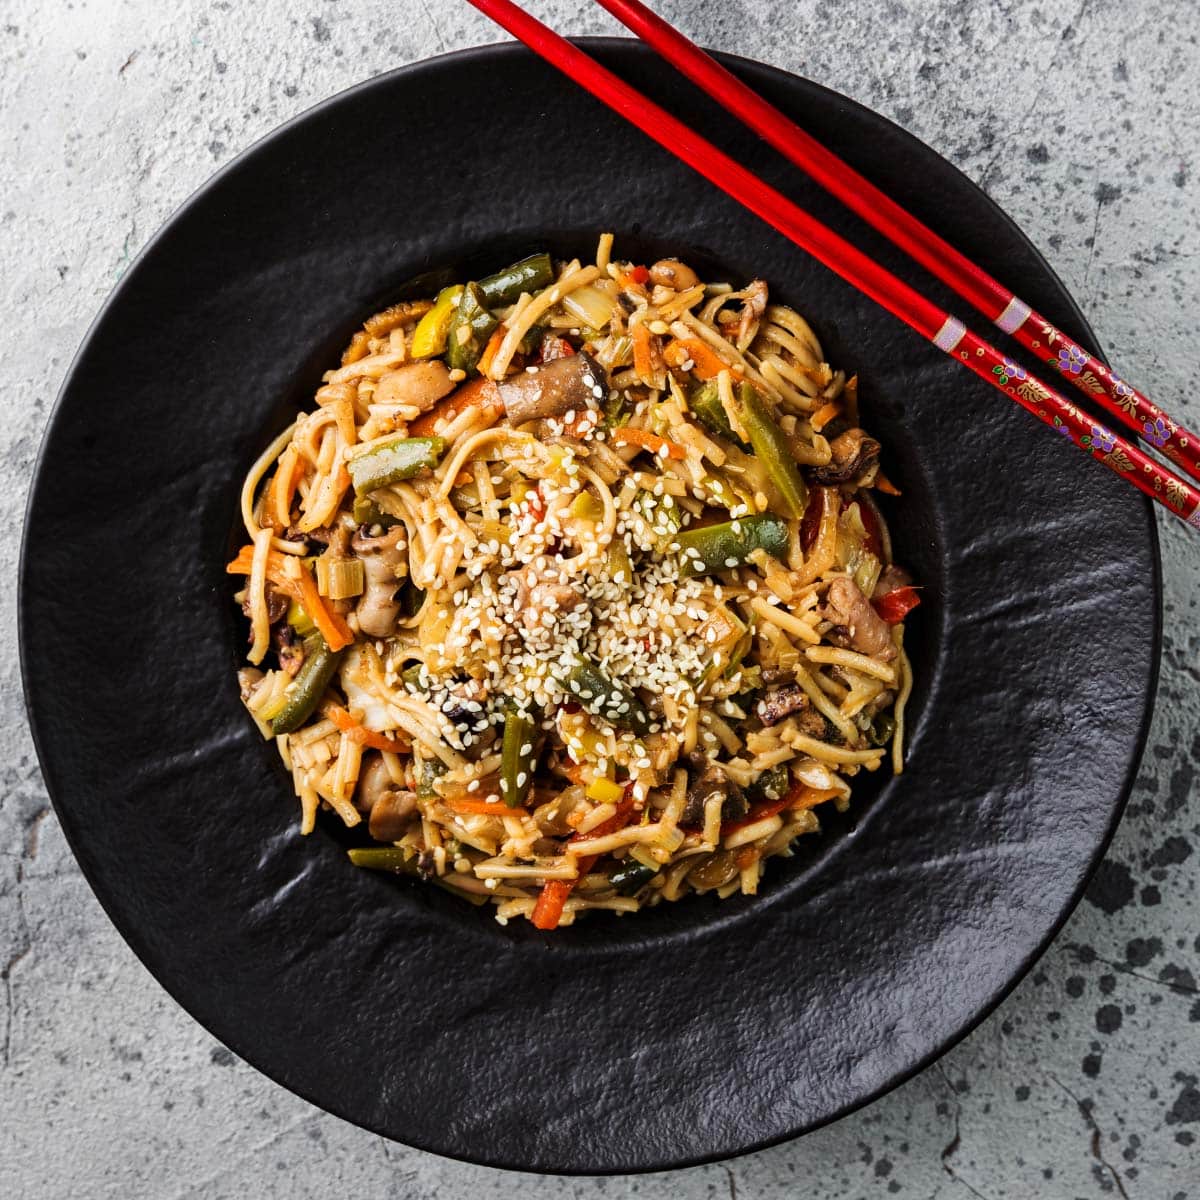 Embrace your inner chef and try Mi Xao Gion in your kitchen! With its bold flavors and satisfying textures, this dish will become a staple in your recipe collection.